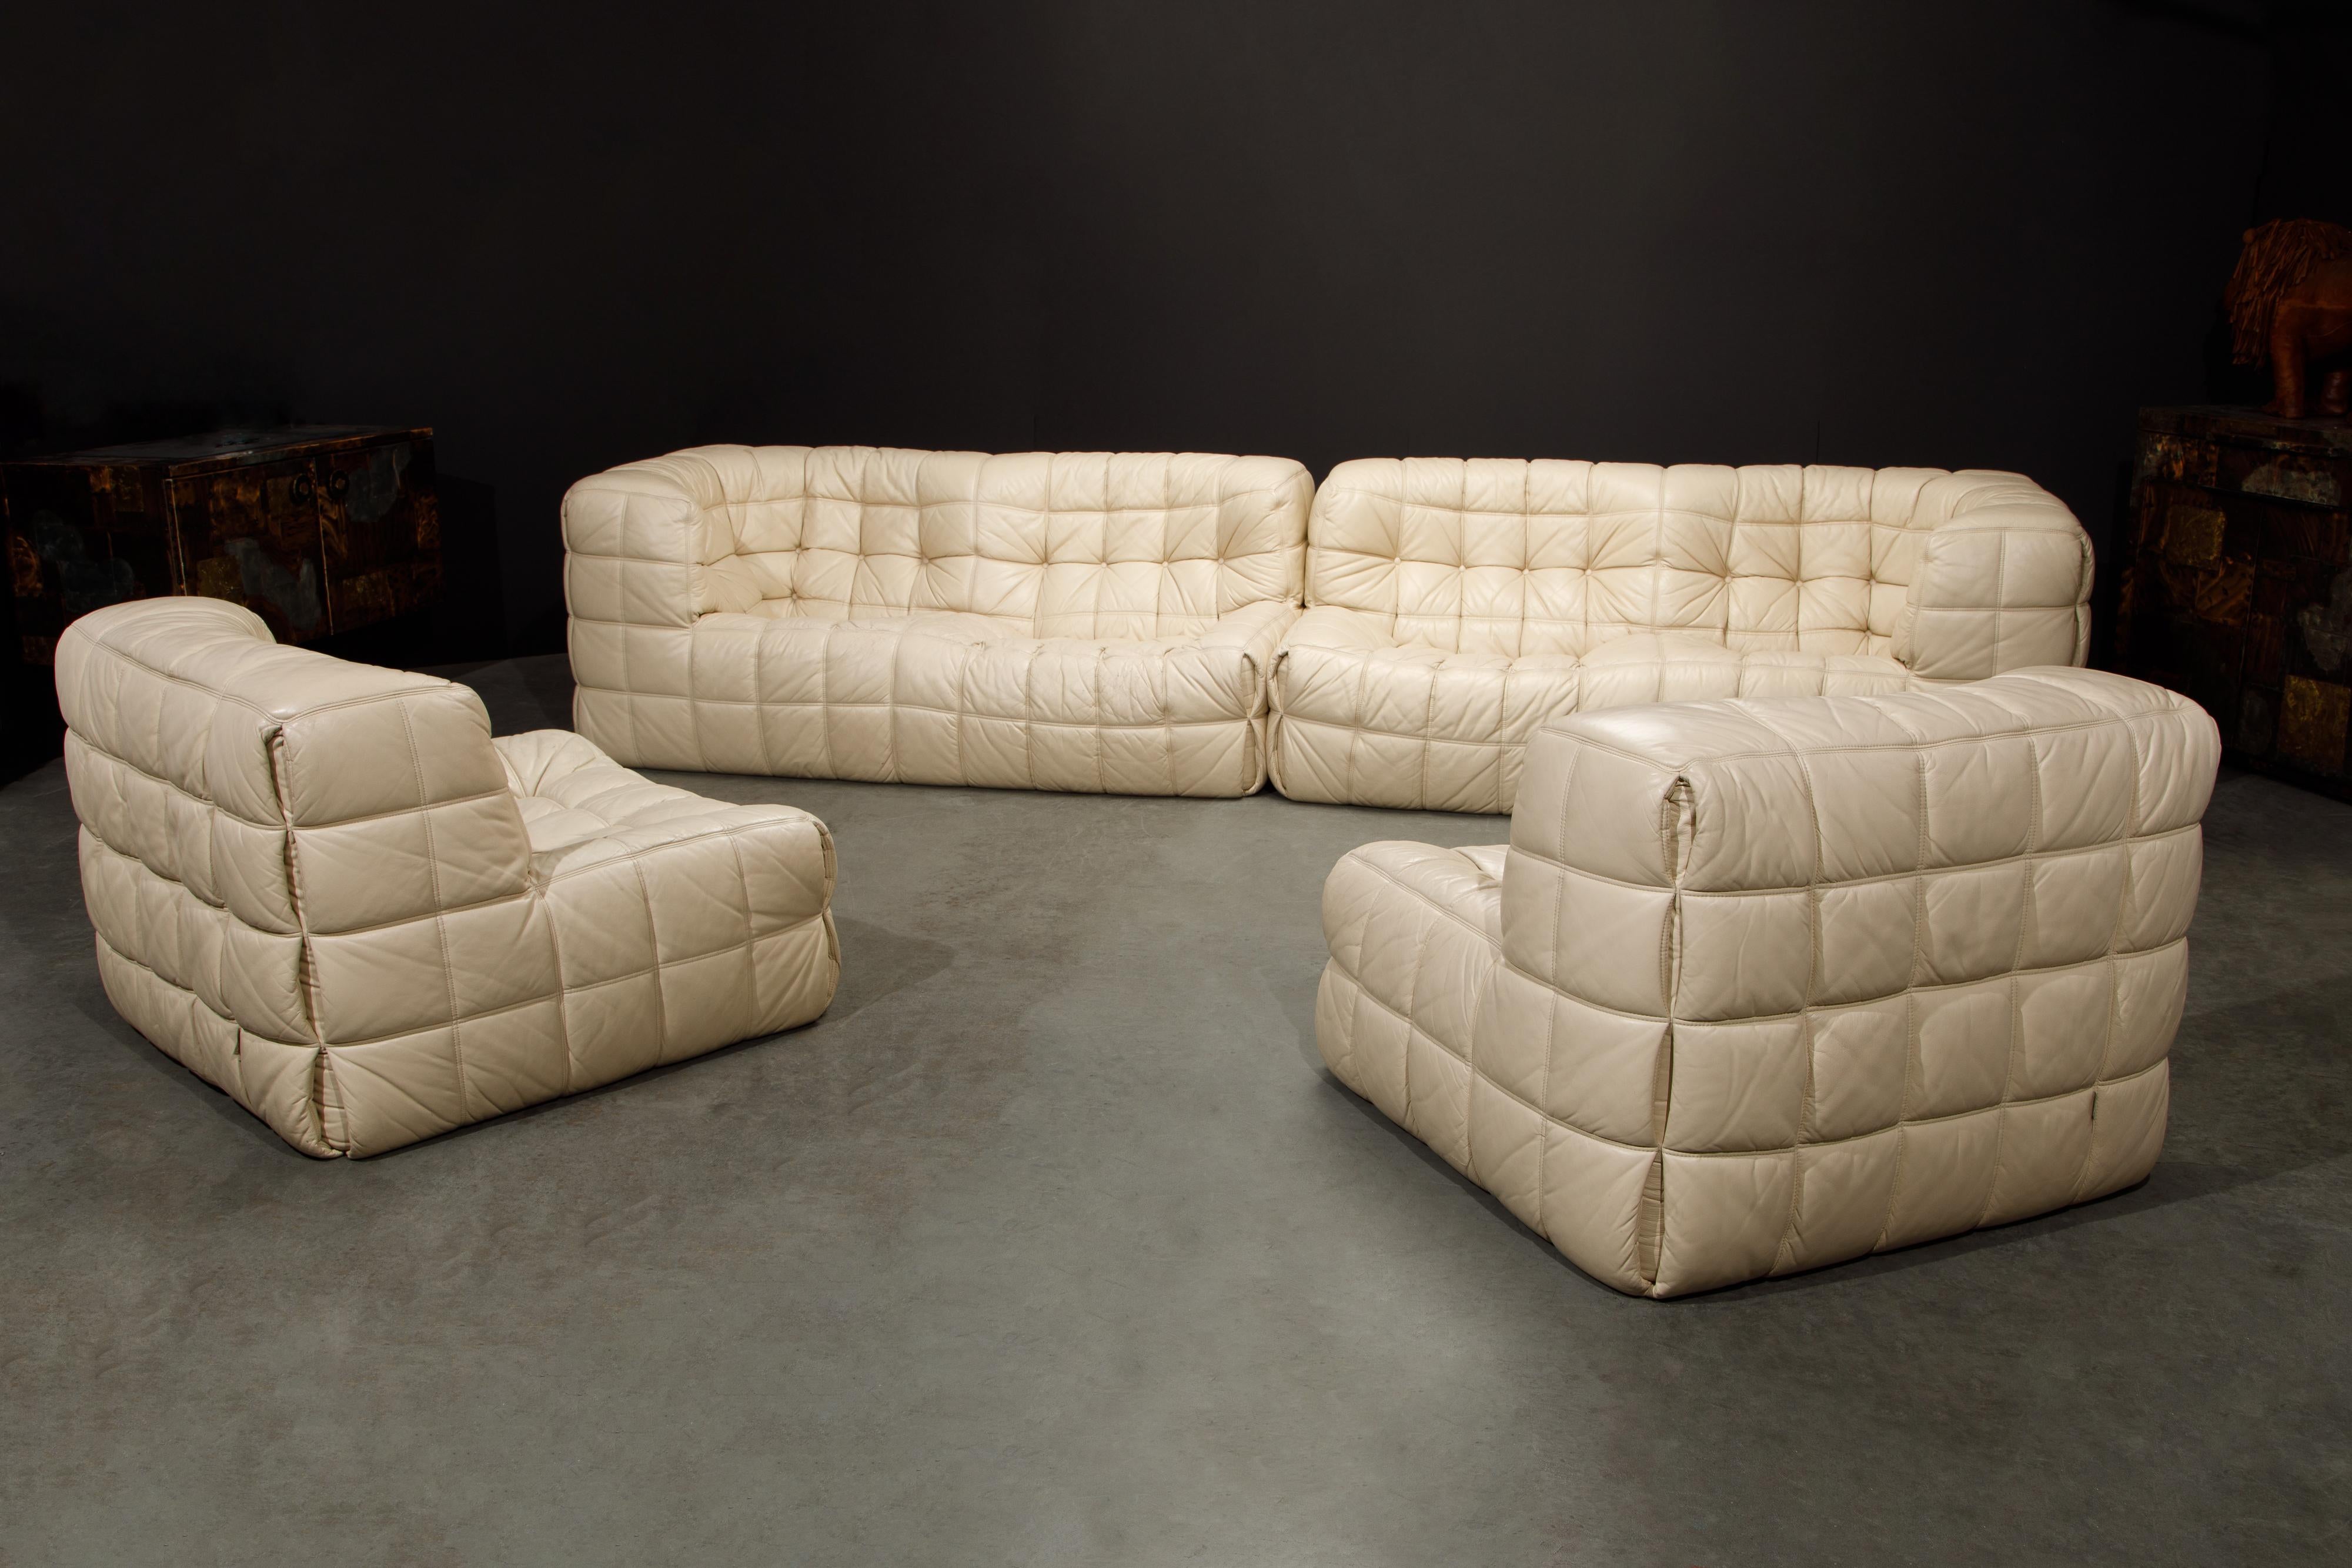 This incredibly rare and sought-after 'Kashima' sectional sofa set by Michel Ducaroy for Ligne Roset, France, was designed in 1976. Upholstered in soft and sumptuous cream colored leather, this living room set is comprised of two lounge seats and